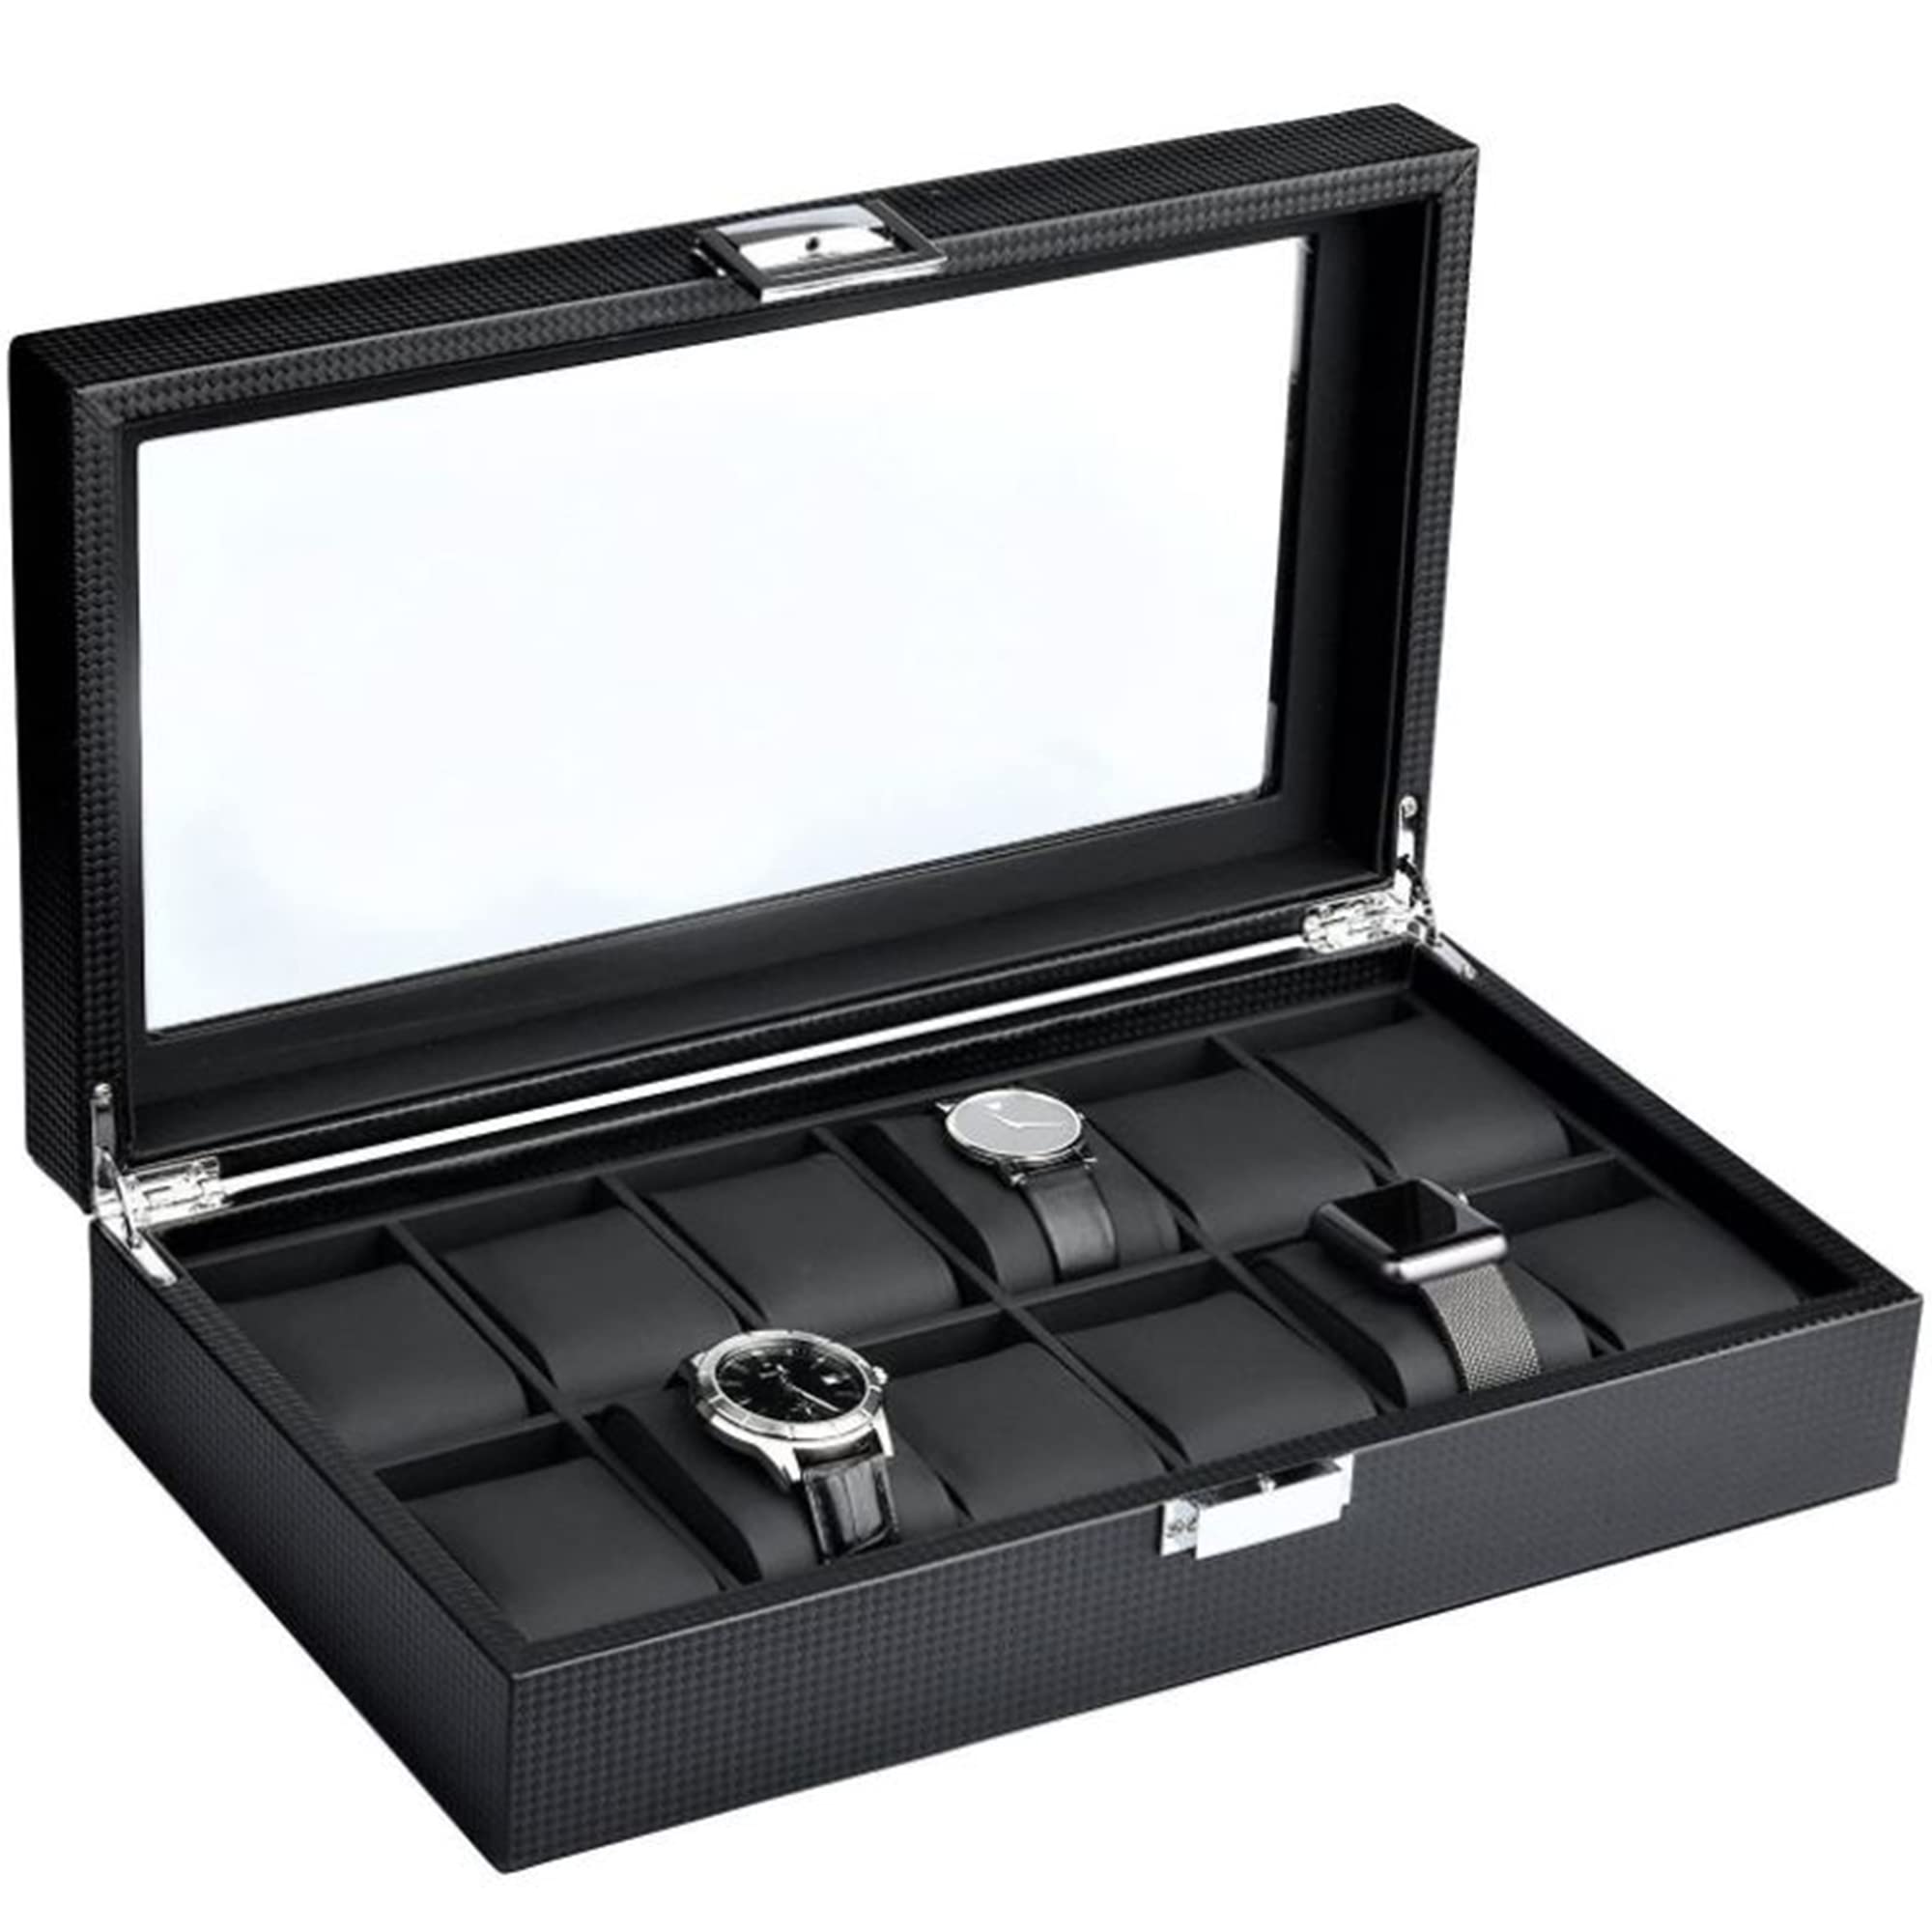 Mantello Watch Box - 12 Slot Watch Cases for Men- Watch Case with Large Glass Top - Watch Box Organizer for Men (Black)